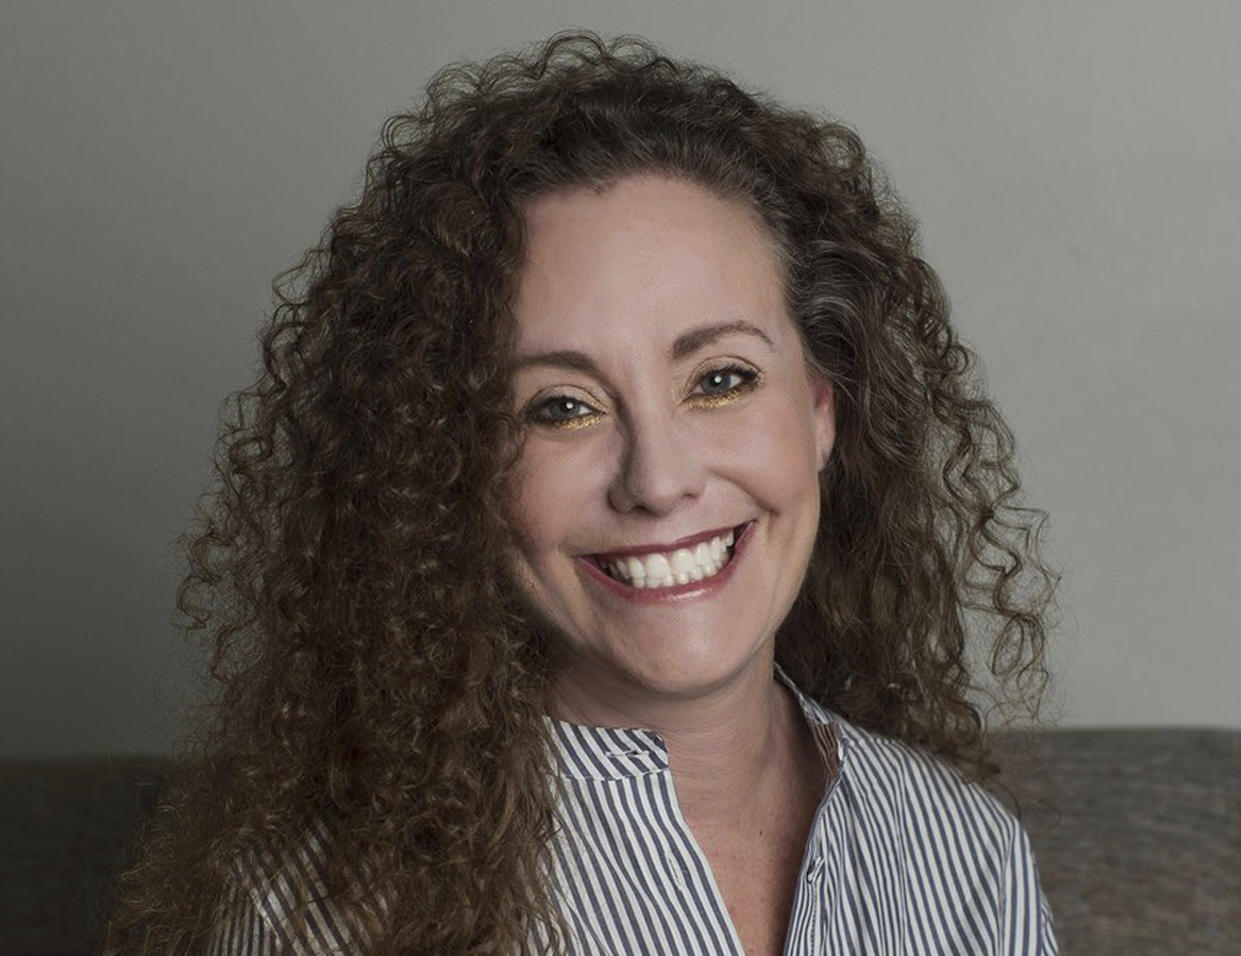 This undated photo of Julie Swetnick was released by her attorney Michael Avenatti via Twitter, Sept. 26, 2018. (Photo: Michael Avenatti via AP)